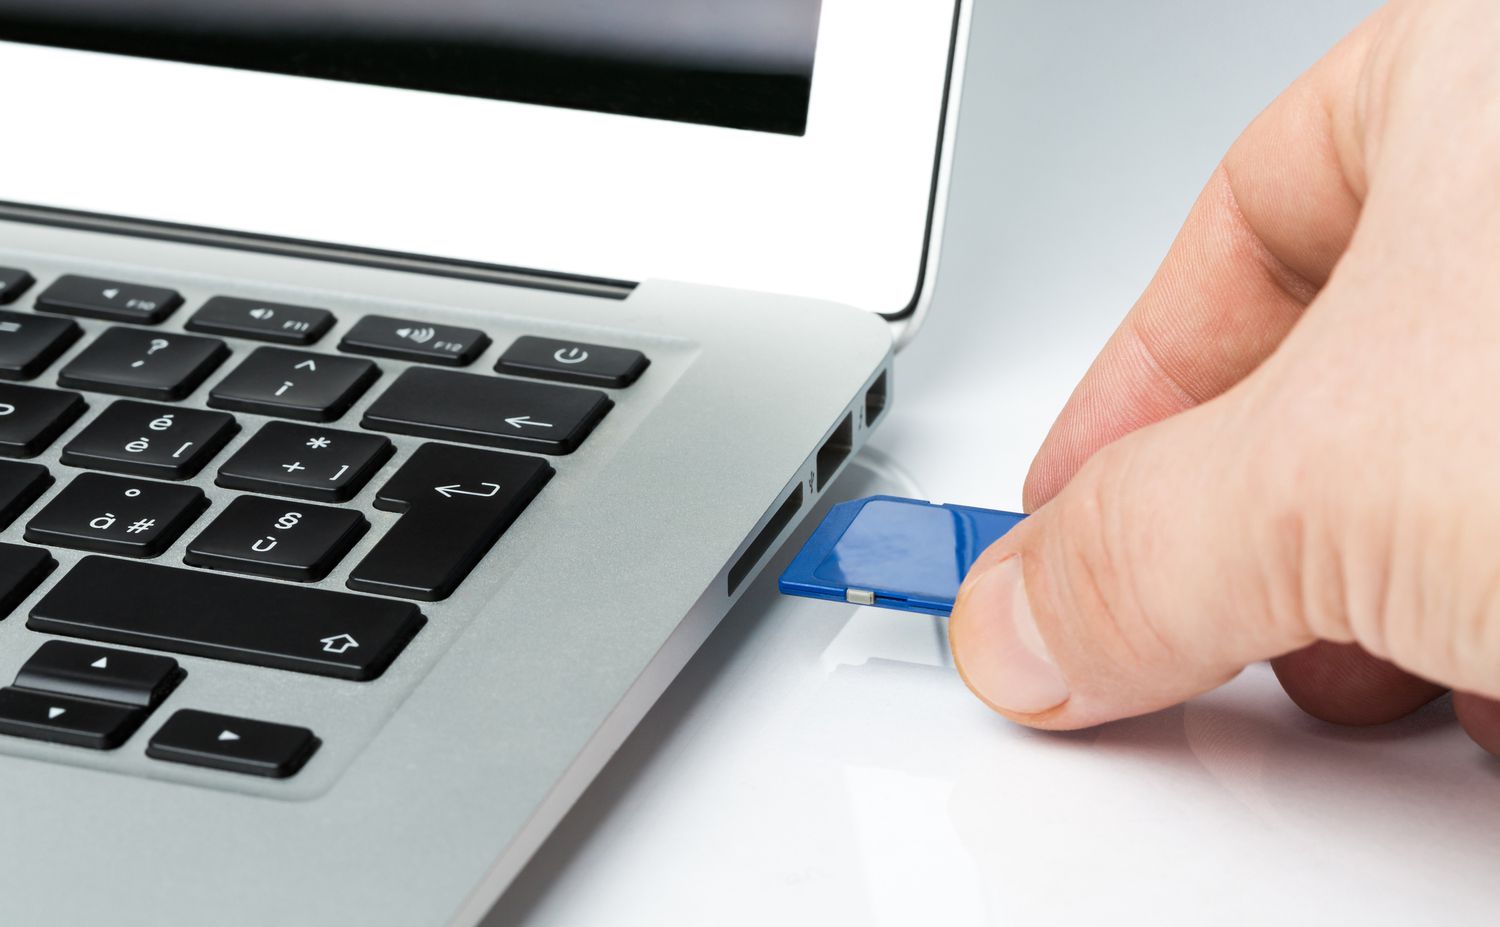 How To Read An SD Card On A Laptop